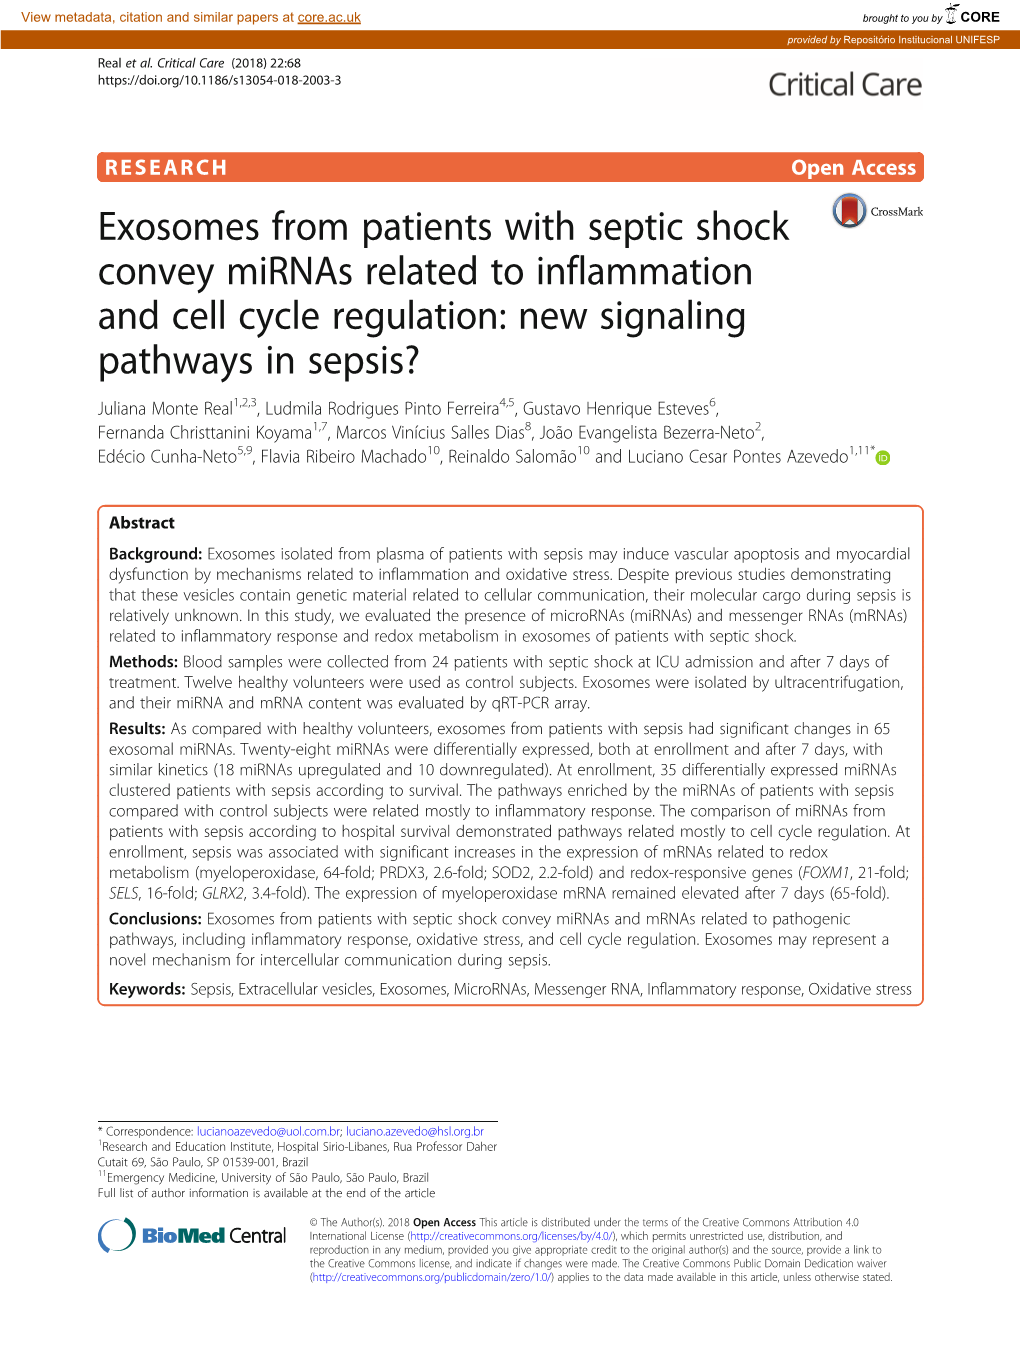 Exosomes from Patients with Septic Shock Convey Mirnas Related to Inflammation and Cell Cycle Regulation